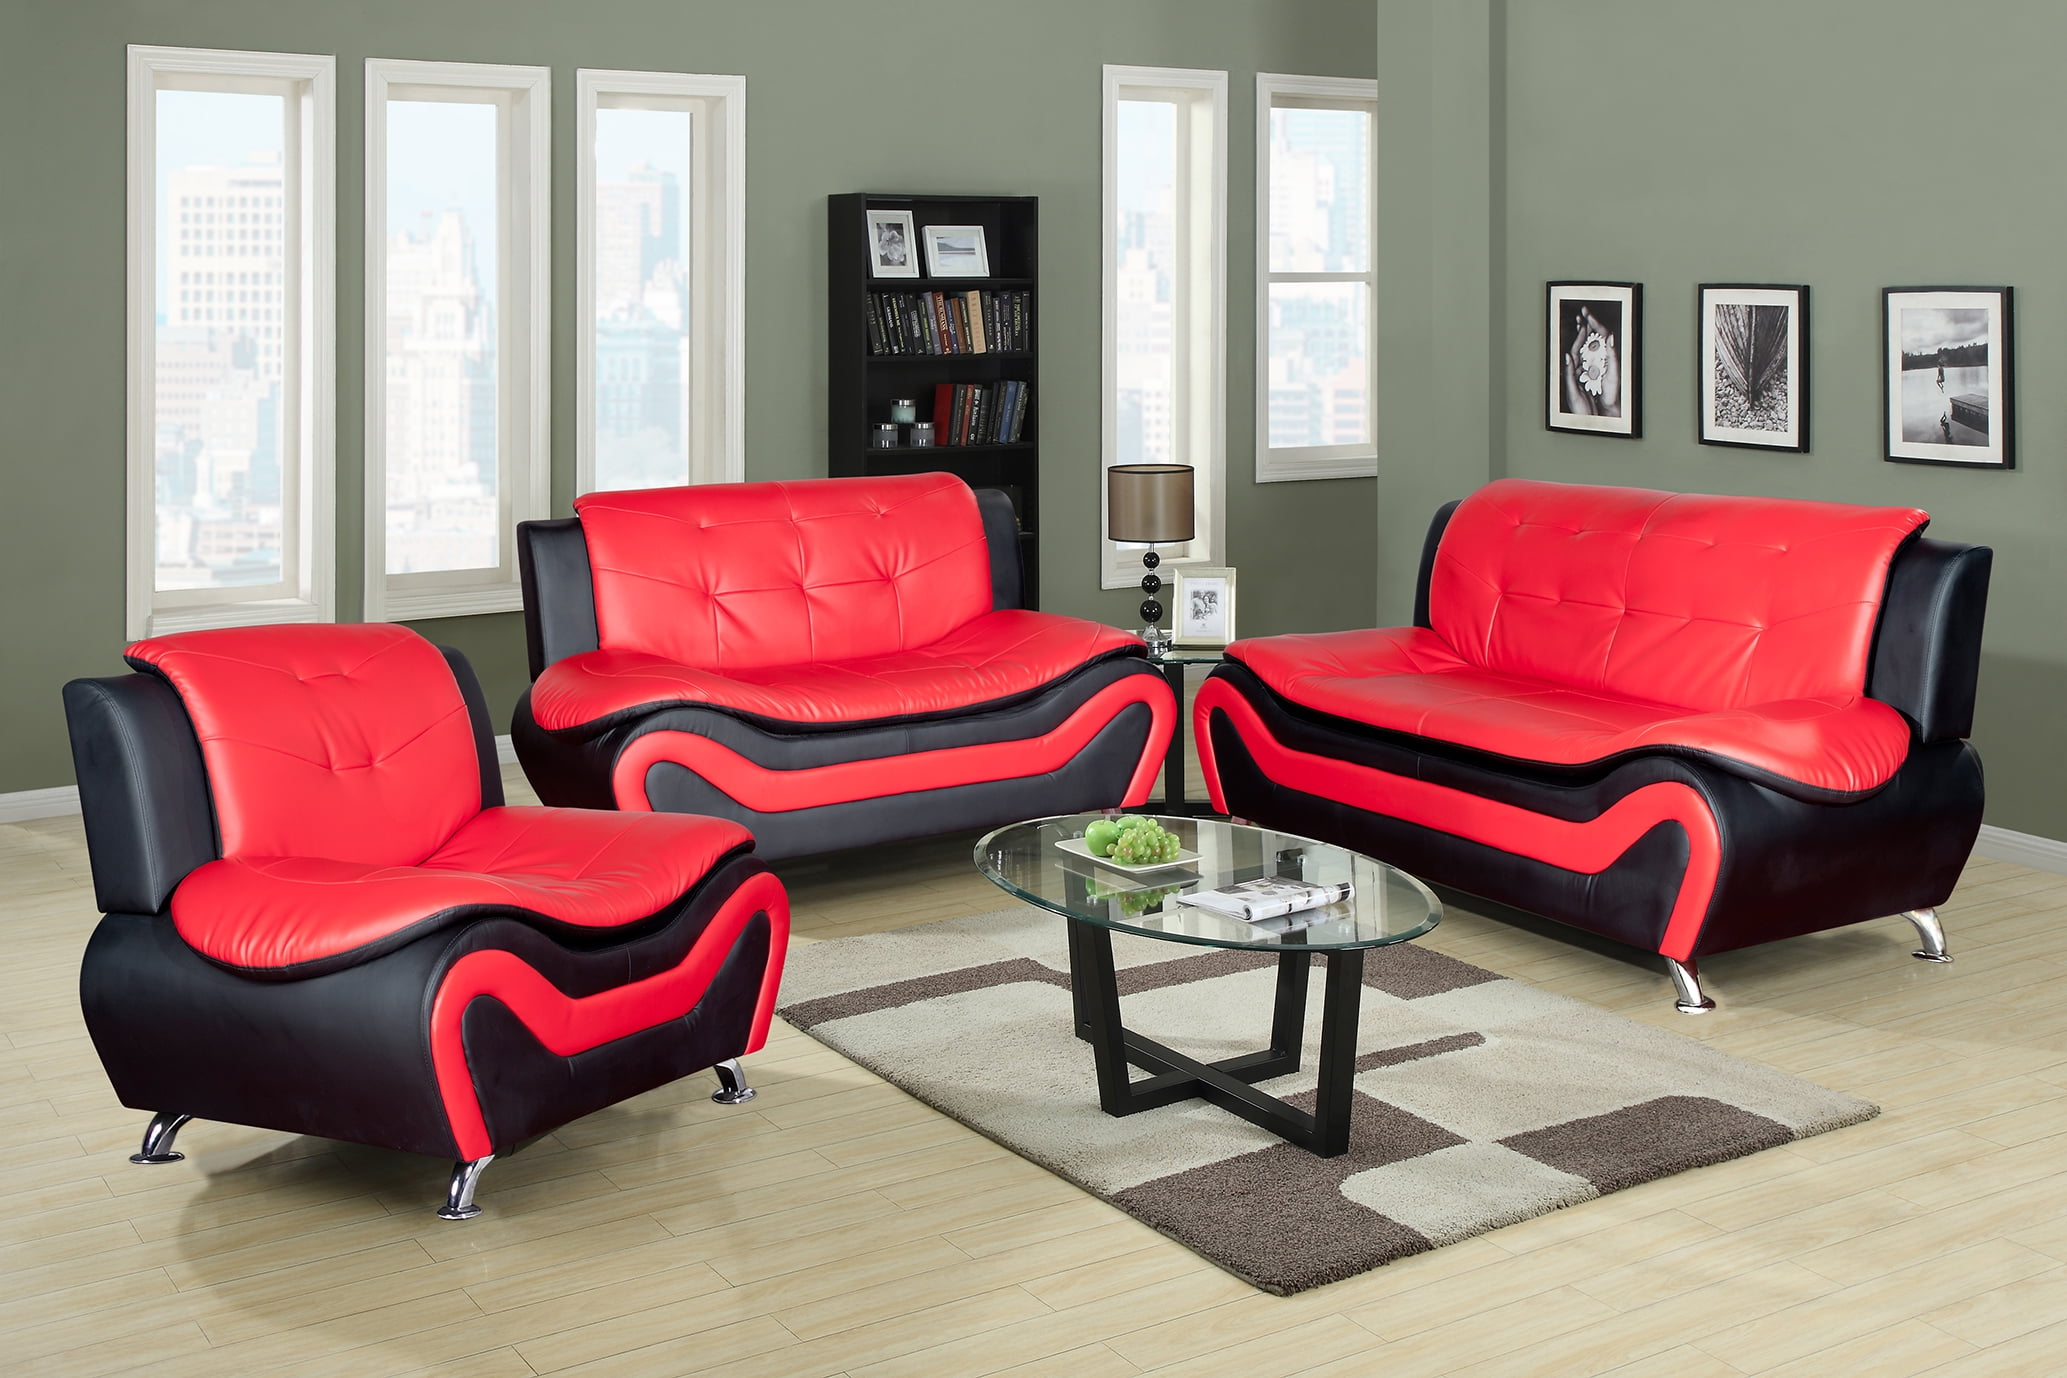 Sofa Loveseat Chair, Red And Black Leather Living Room Furniture